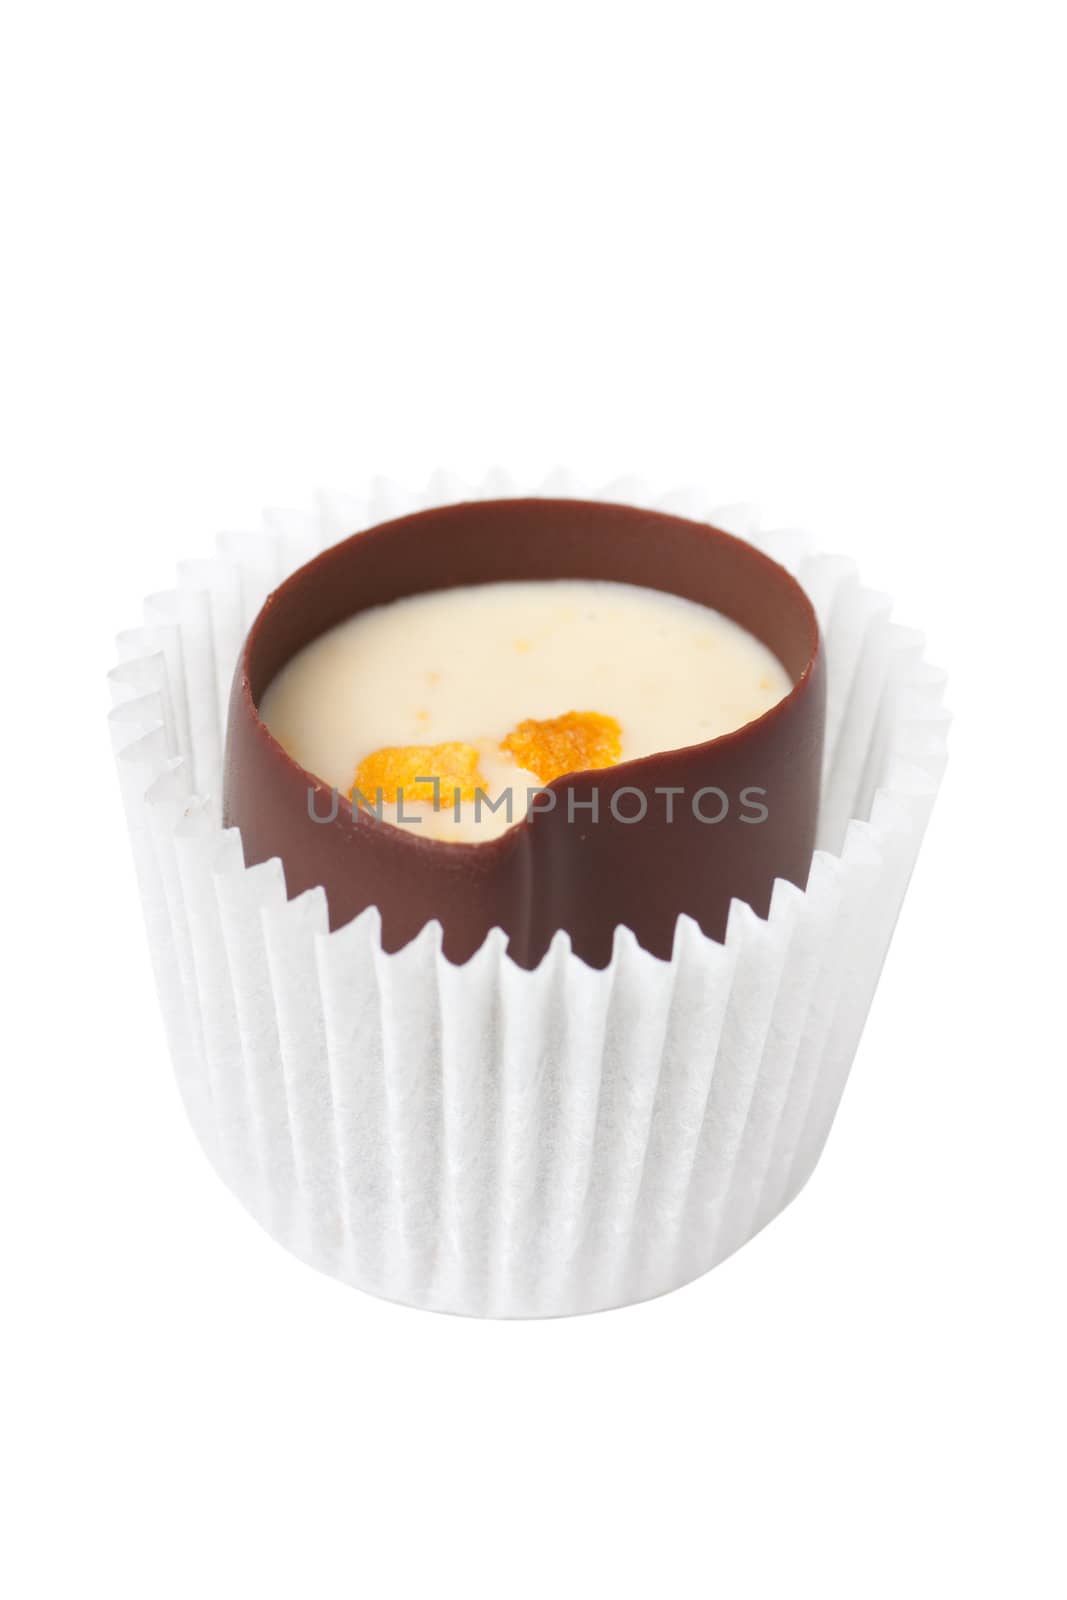 Closeup view of chocolate candy over white background